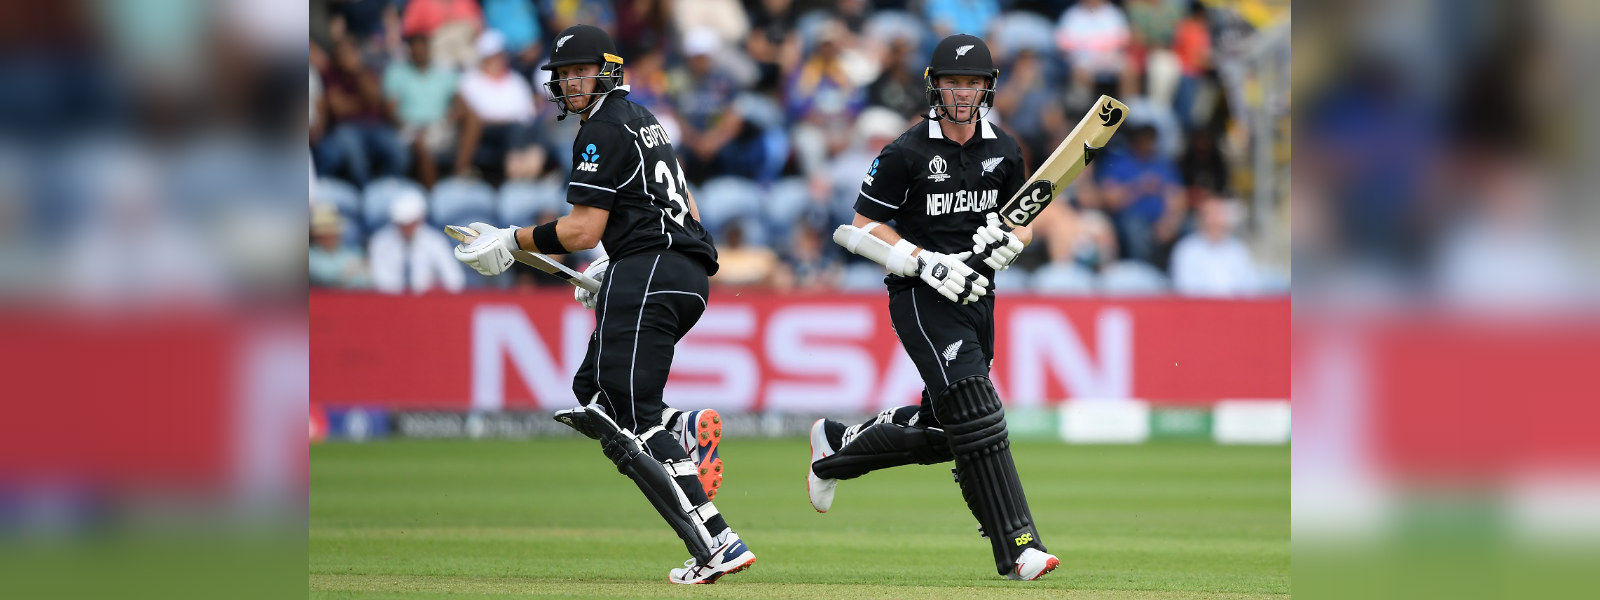 CRICKET WORLD CUP: Sri Lanka outclassed by dominant New Zealand